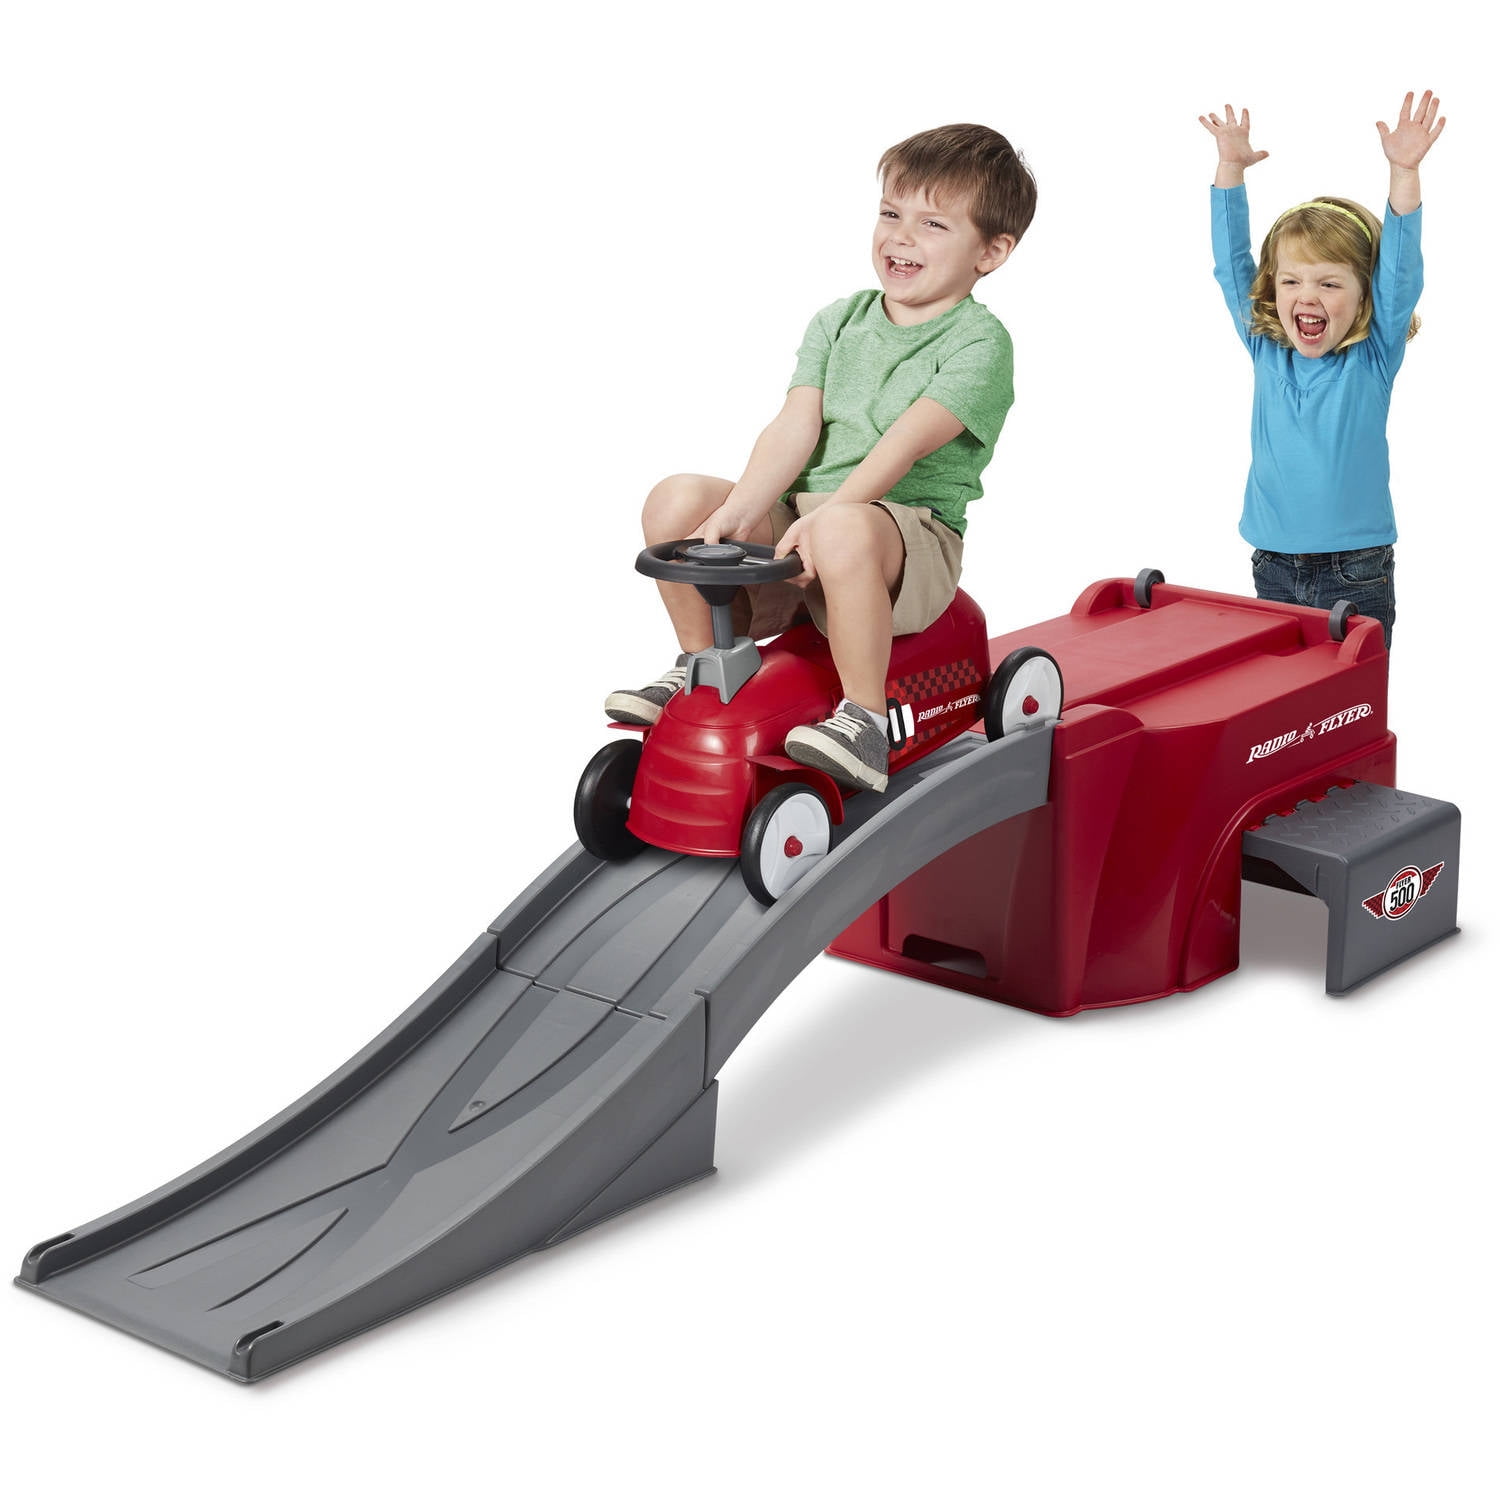 Radio Flyer, Flyer 500 Ride-on with Ramp and Car, Red - 1